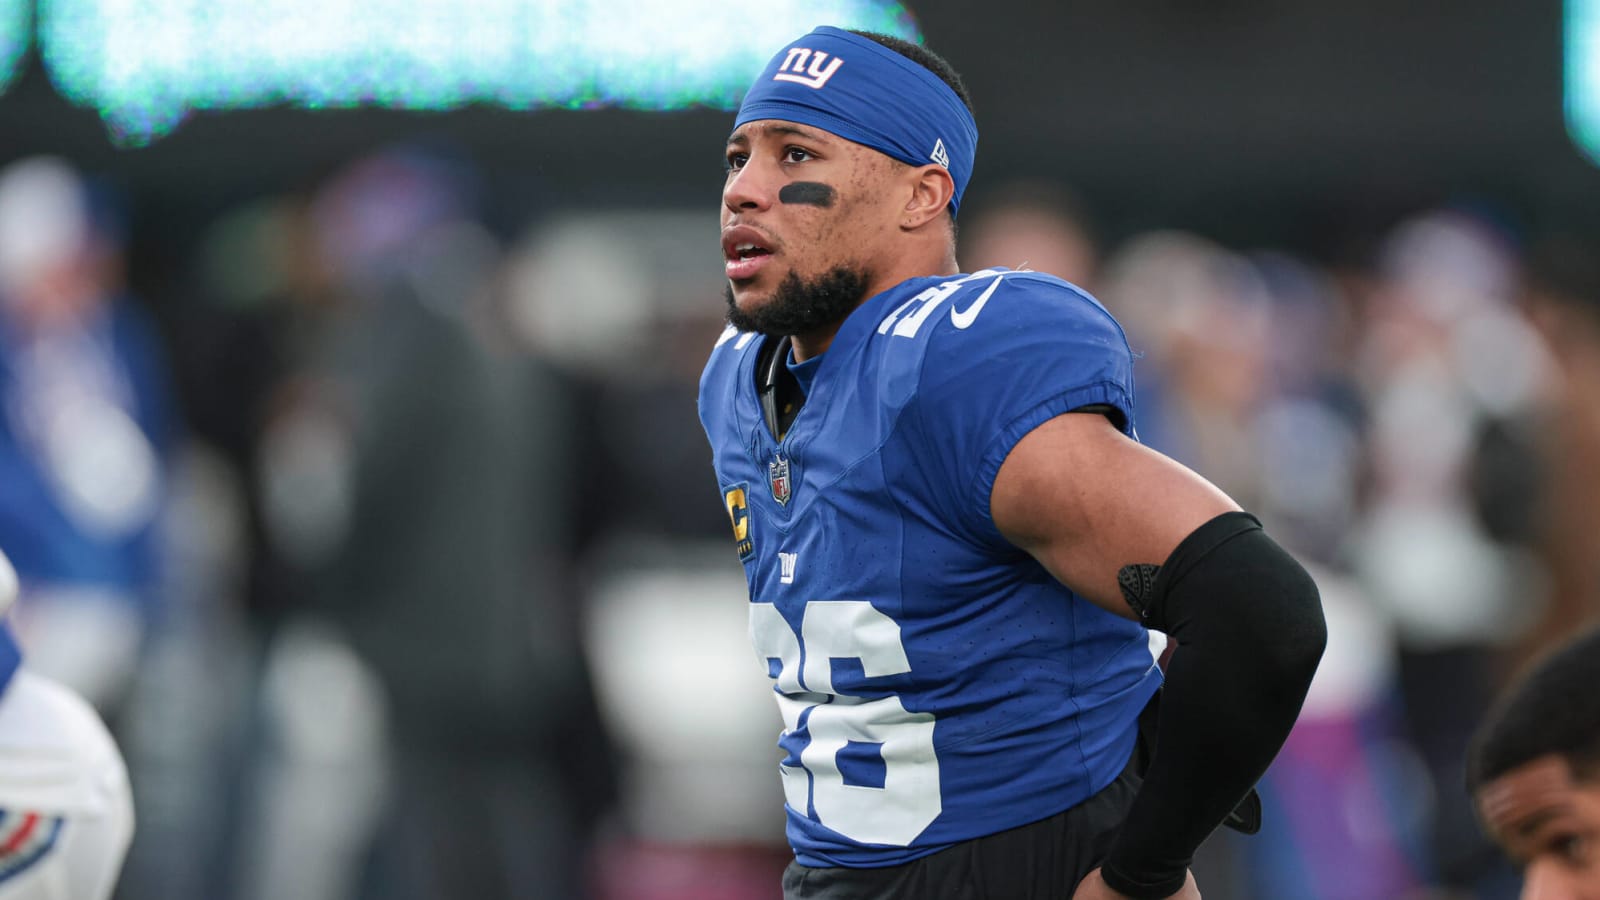 Former GM discusses Giants possibly using franchise tag on Saquon Barkley